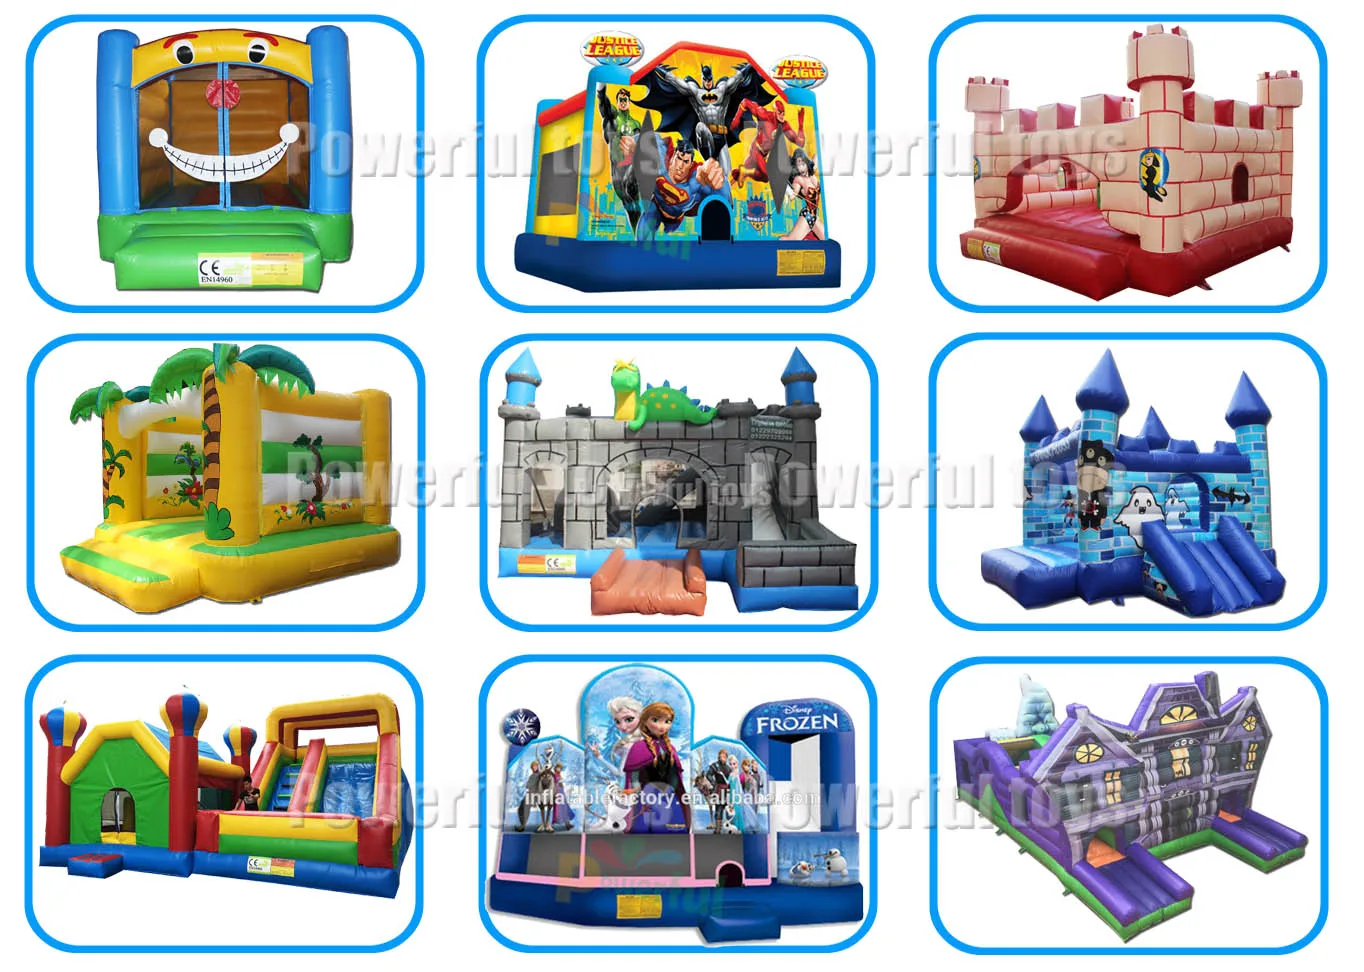 Commercial large inflatables bouncy castles house